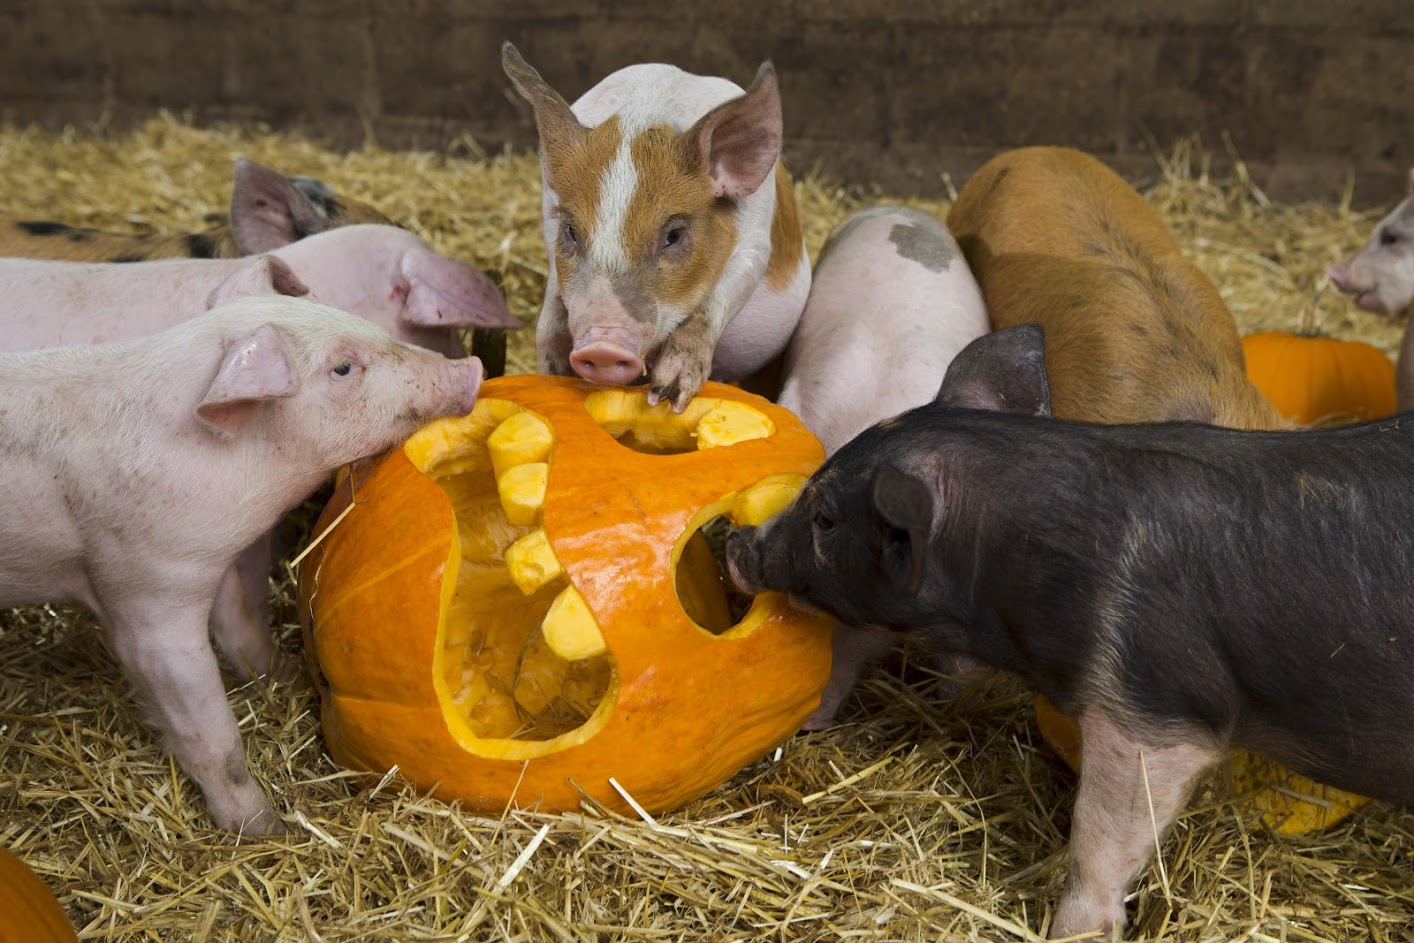 The pigs getting into the Halloween mood